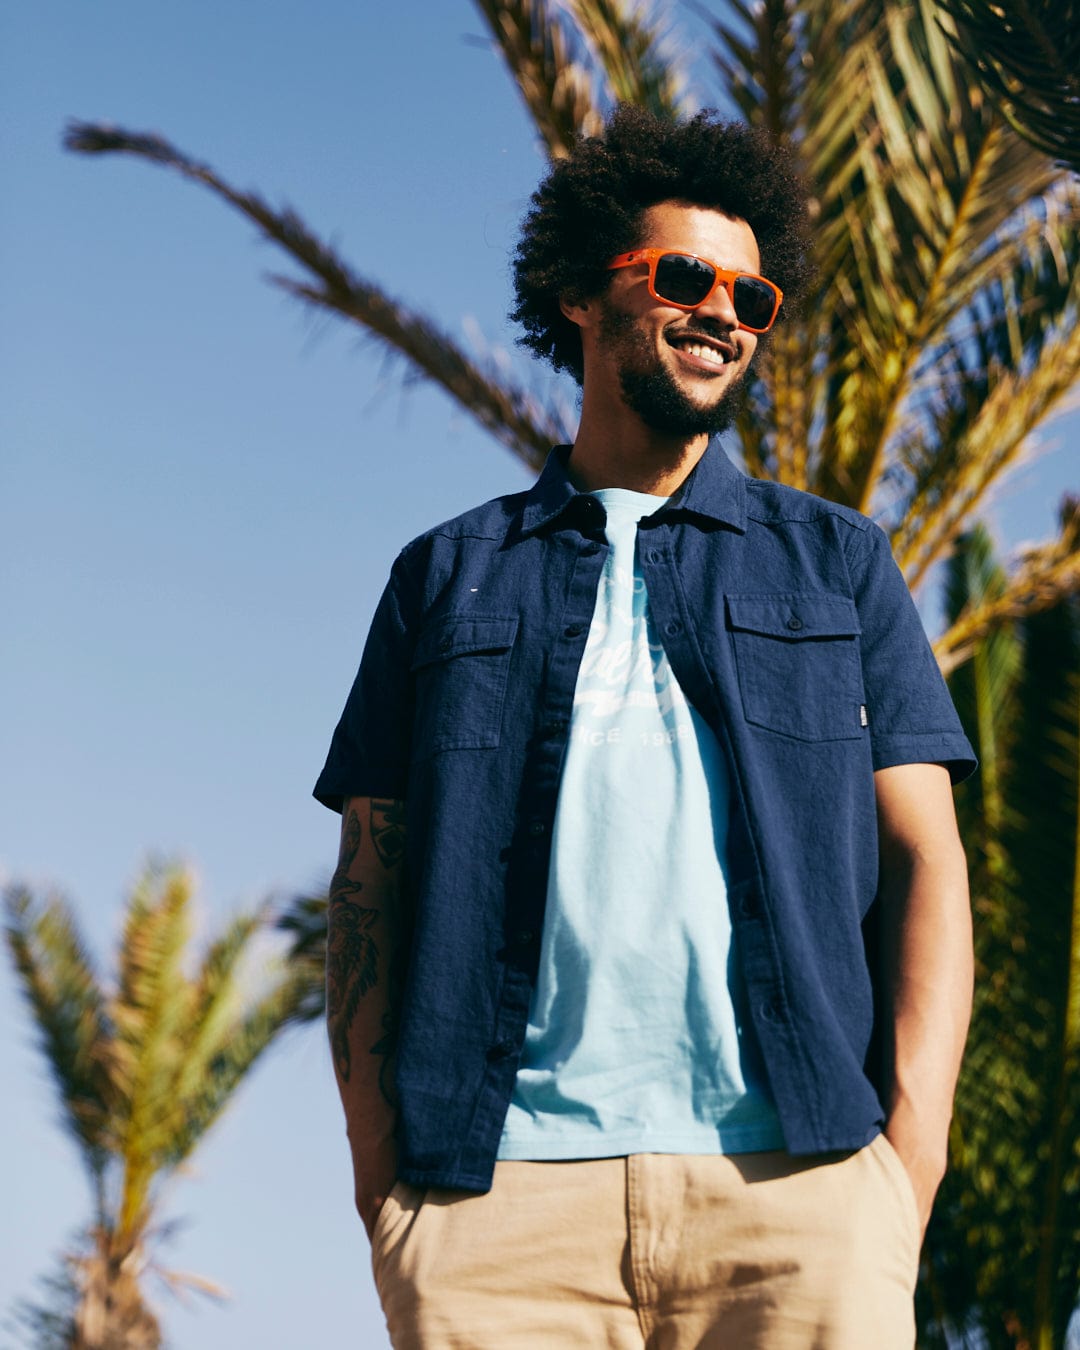 A man with curly hair wearing sunglasses, a Polperro - Mens Short Sleeve Shirt - Blue with a Saltrock woven label over a t-shirt, and beige shorts, is standing outdoors with palm trees in the background.